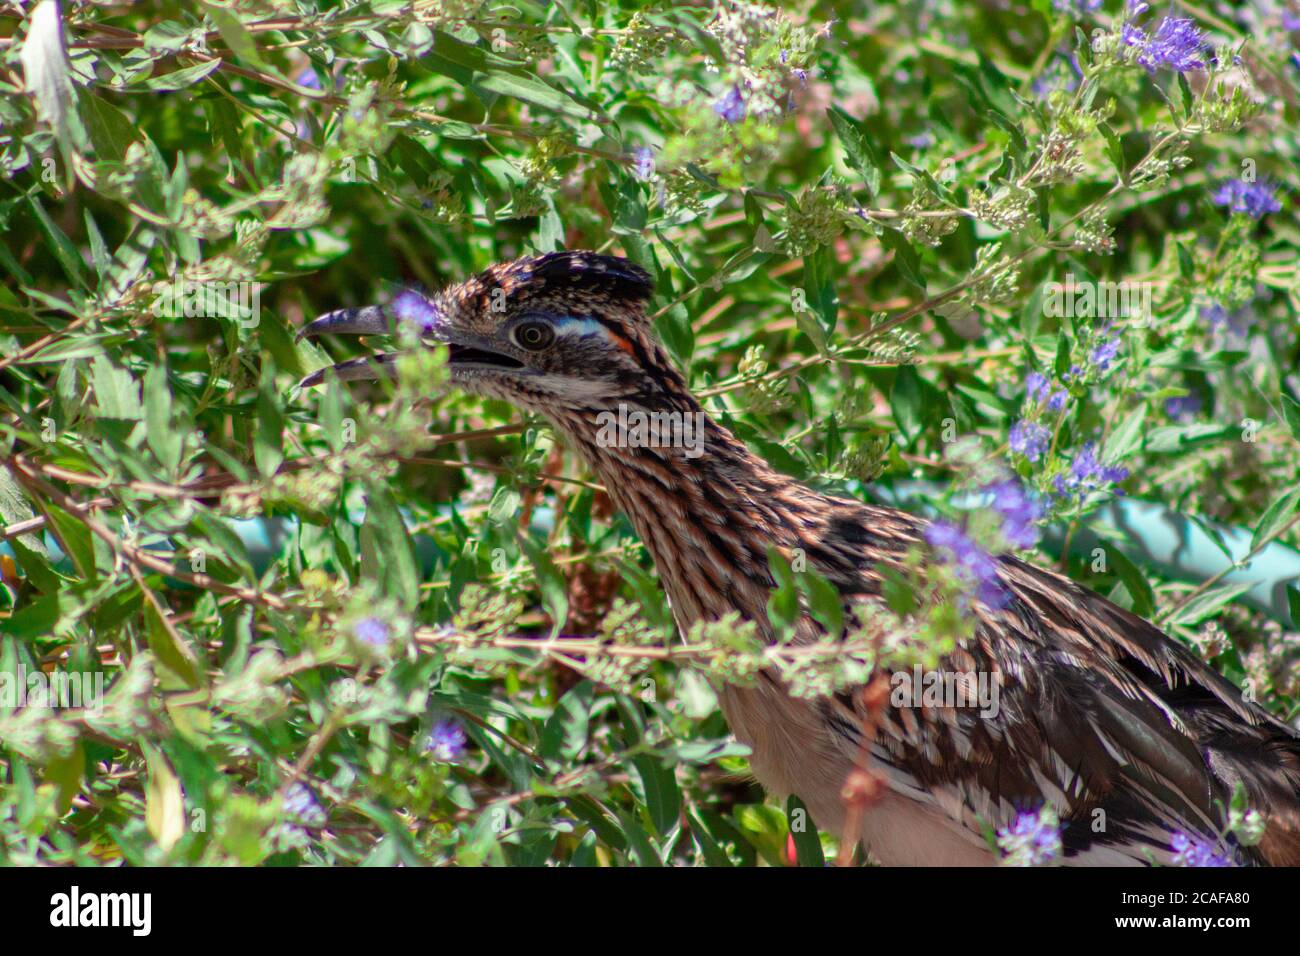 Roadrunner bird hides camouflaged among a green bush with purple flowers in Albuquerque, New Mexico, USA Stock Photo